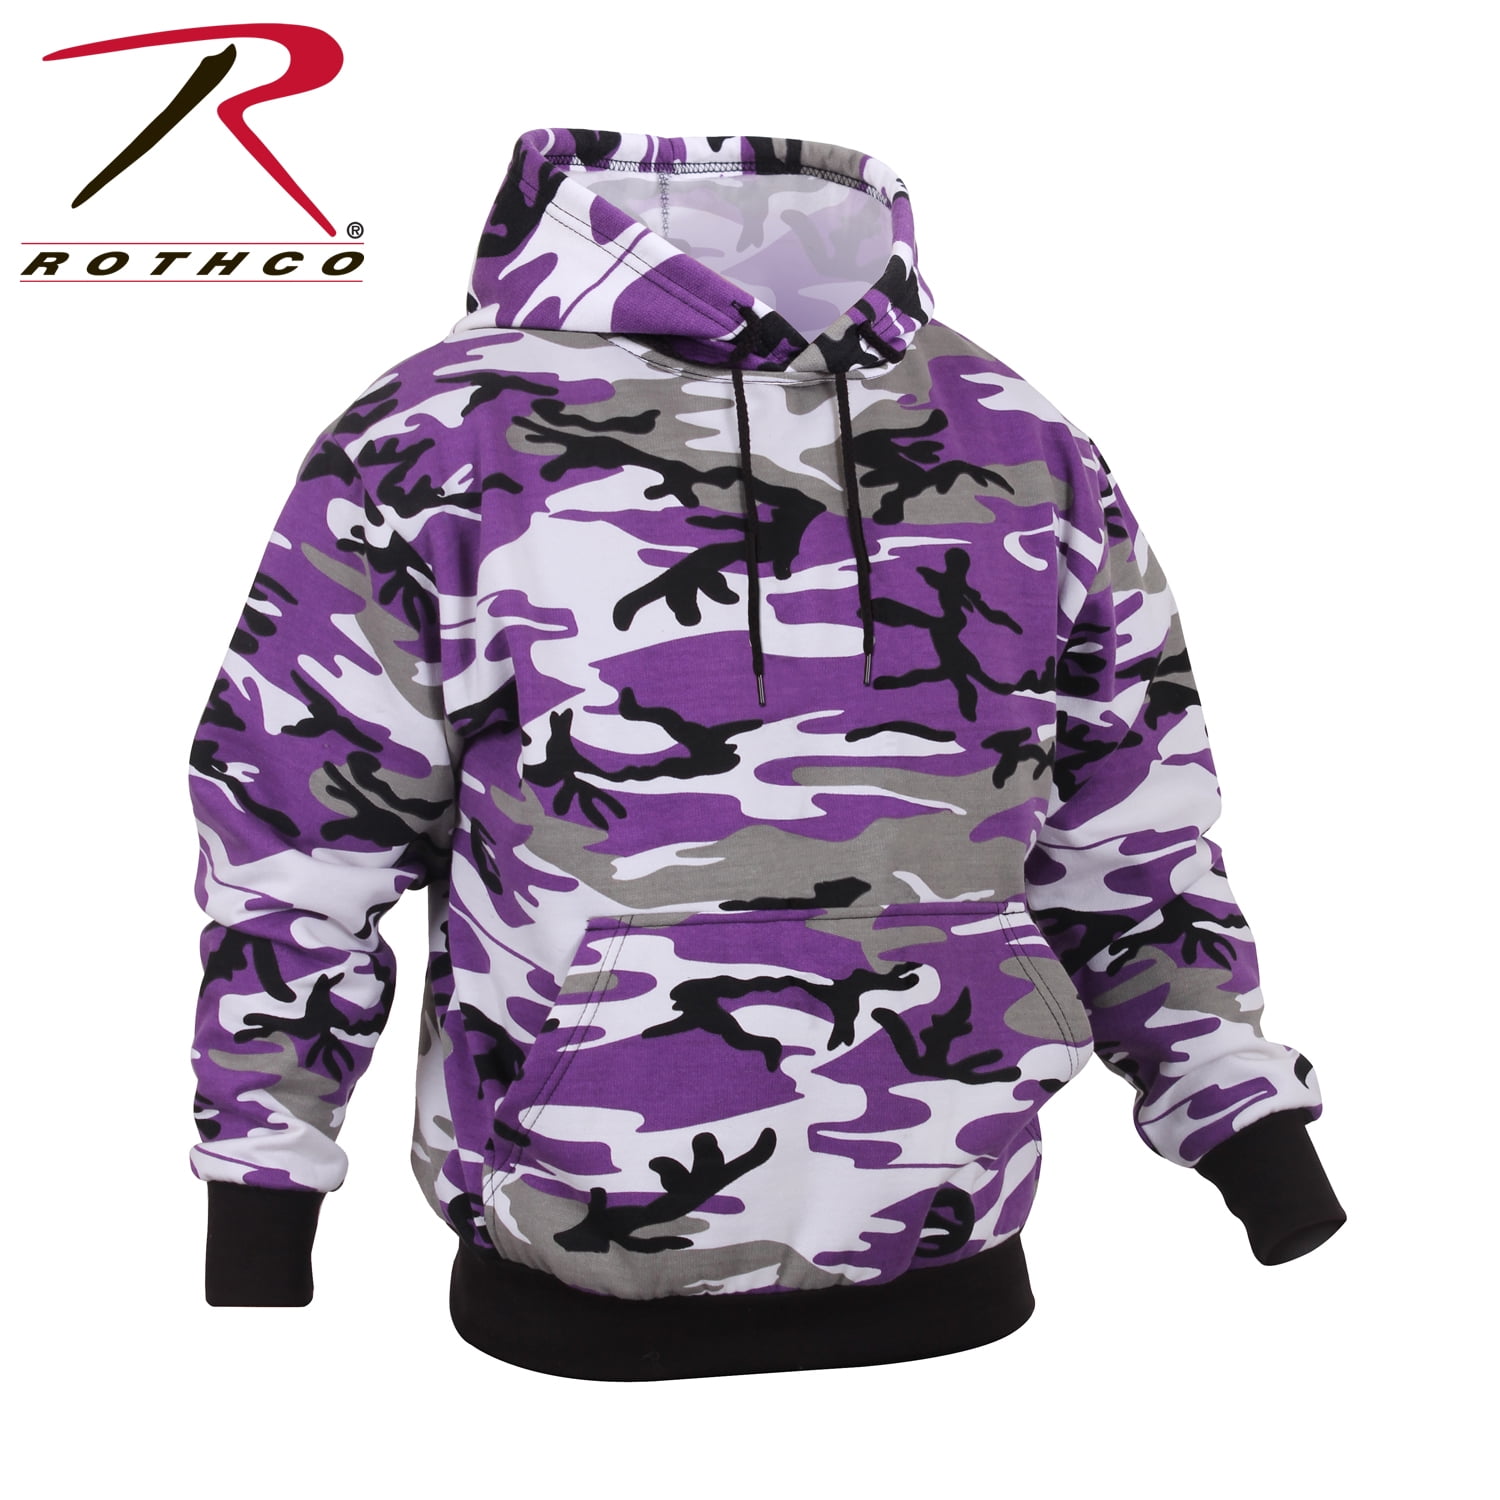 hooded sweatshirt army acu digital camo pullover various sizes rothco 6595 